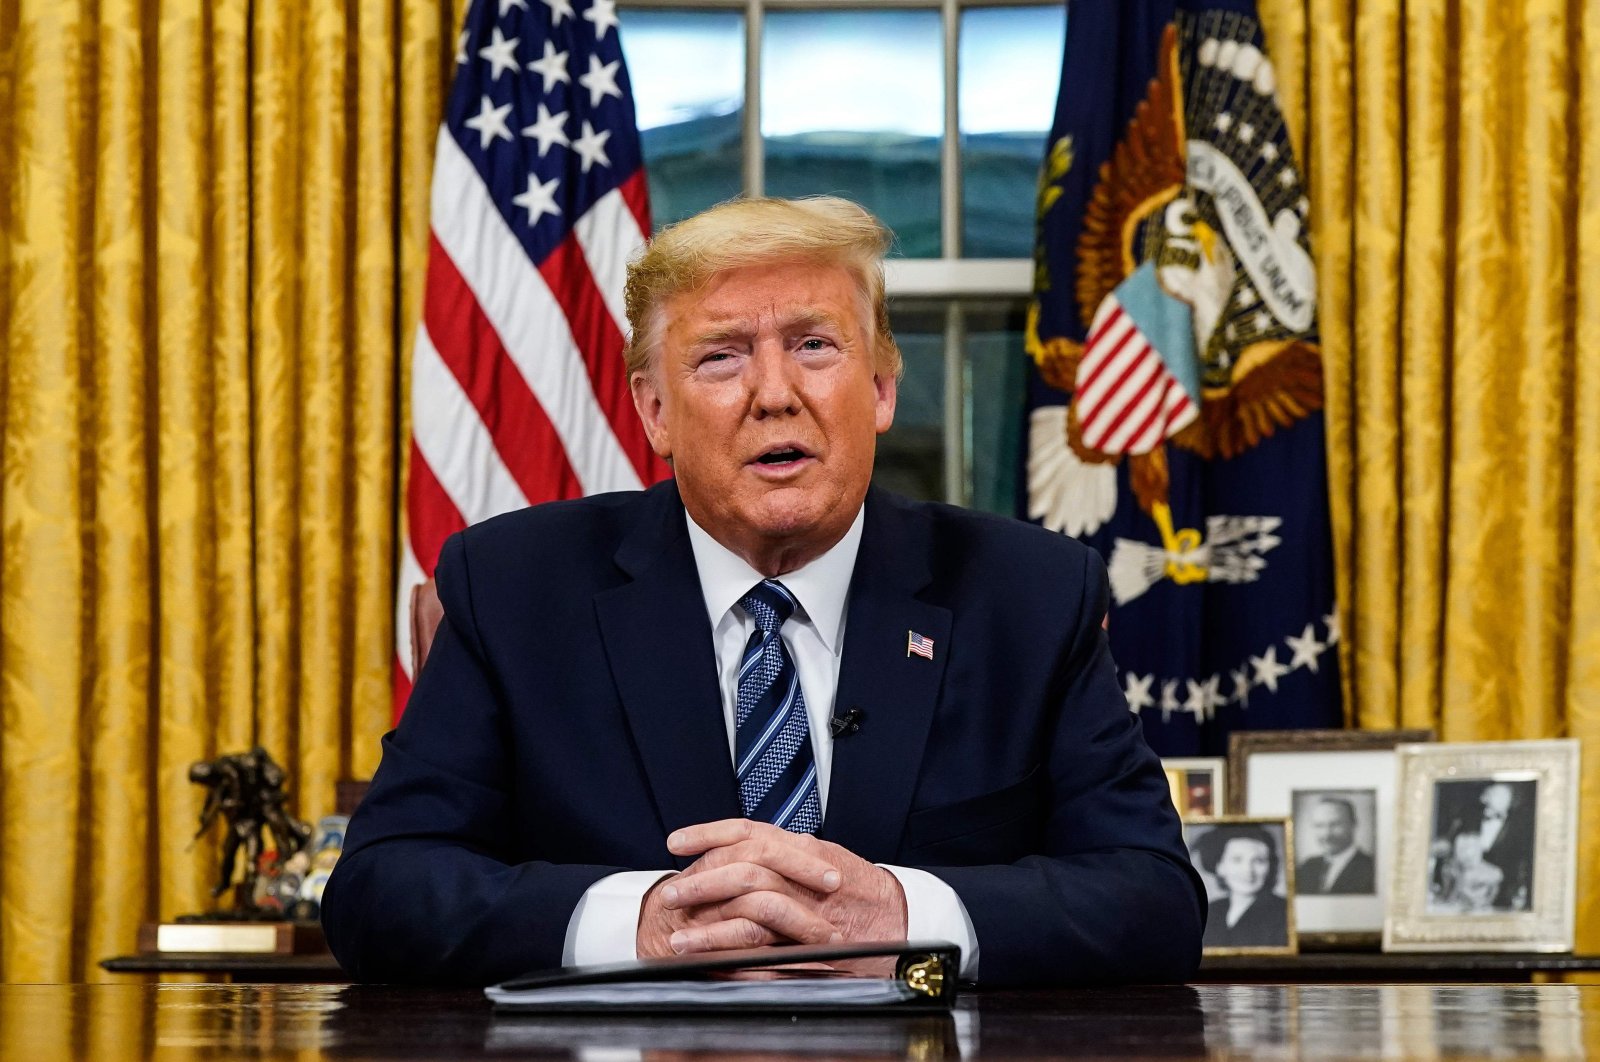 U.S. President Donald Trump addresses the nation from the Oval Office about the widening novel coronavirus crisis, in Washington, D.C. on March 11, 2020. (AFP Photo)